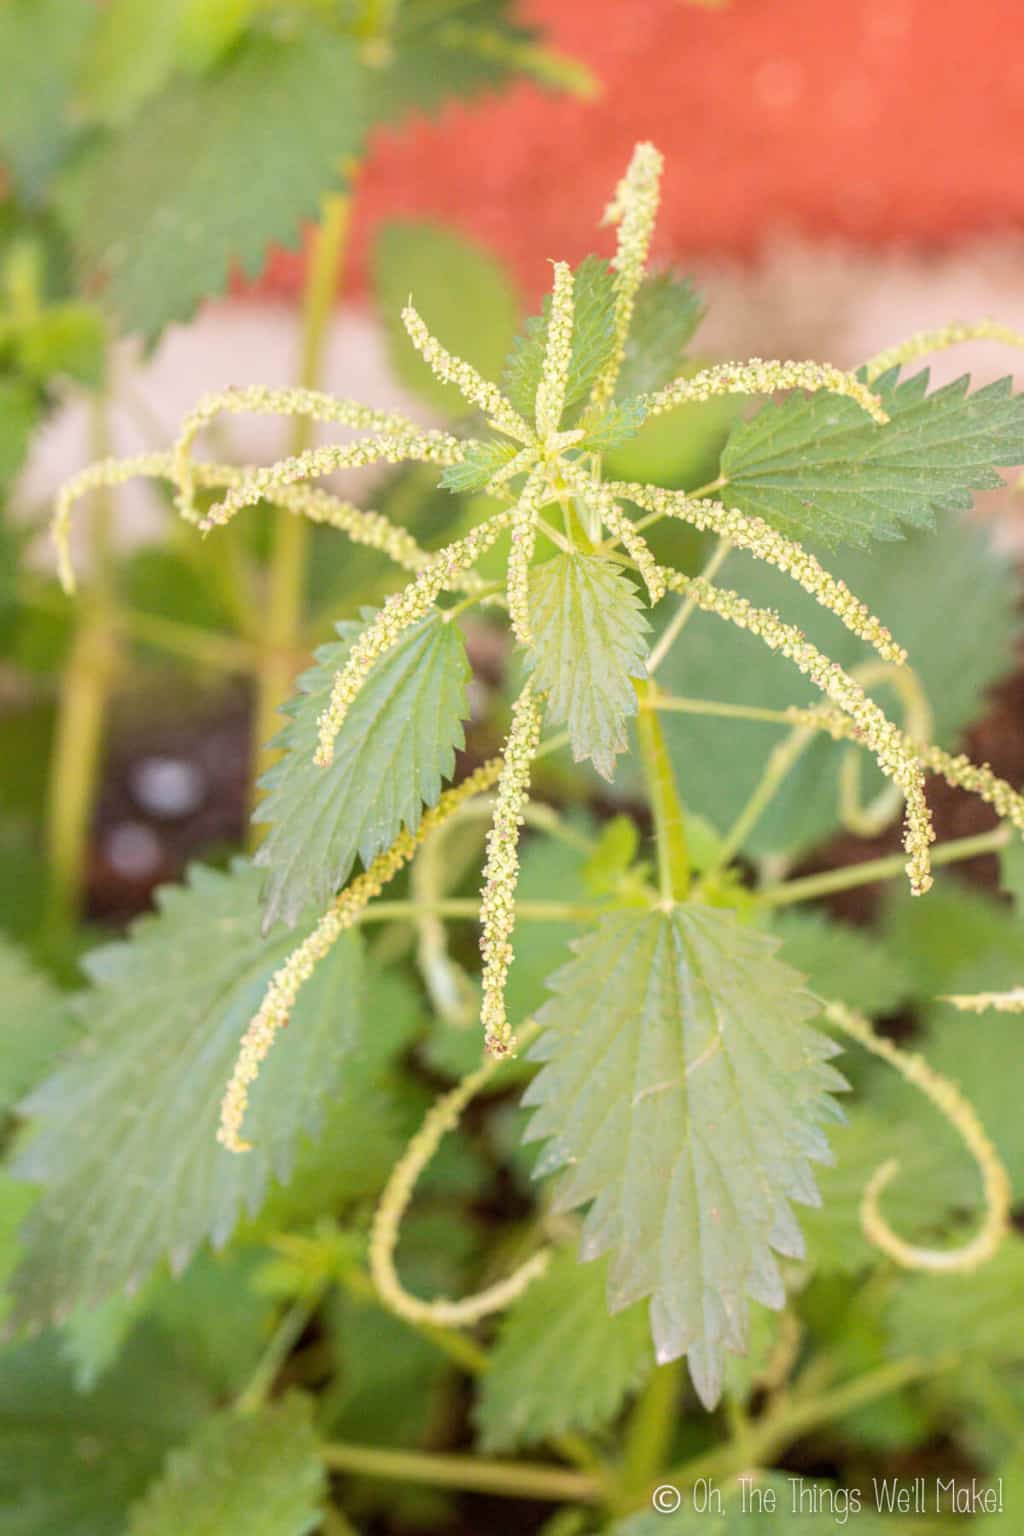 Close up of older nettle plant showing  yellow nettle flowers.